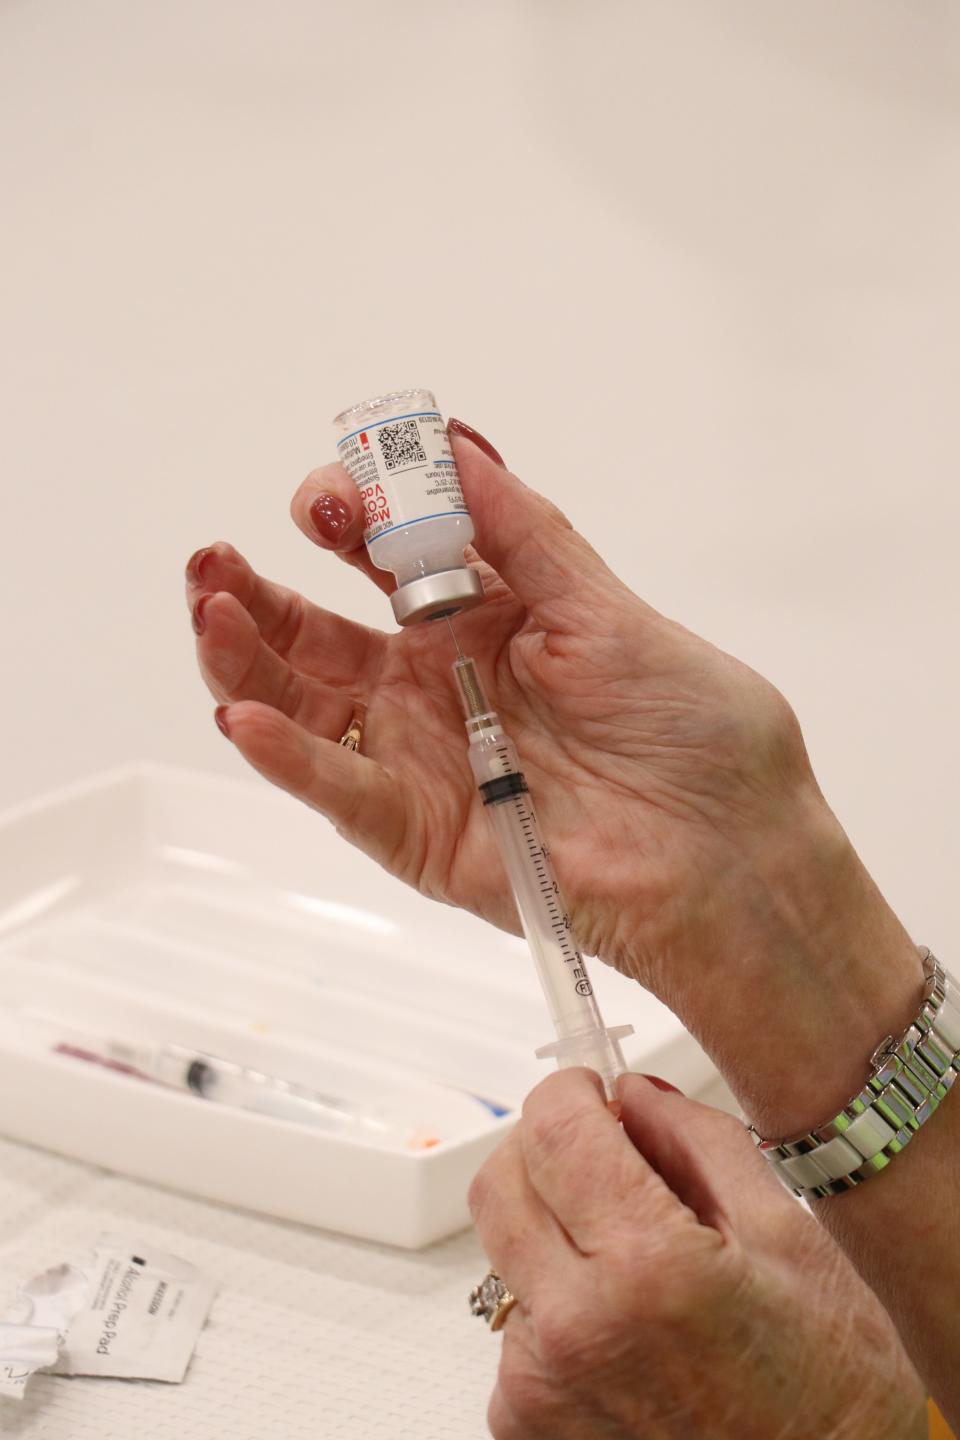 A Moderna vaccine to ward off COVID-19 is prepared at a Sturgis clinic in March.